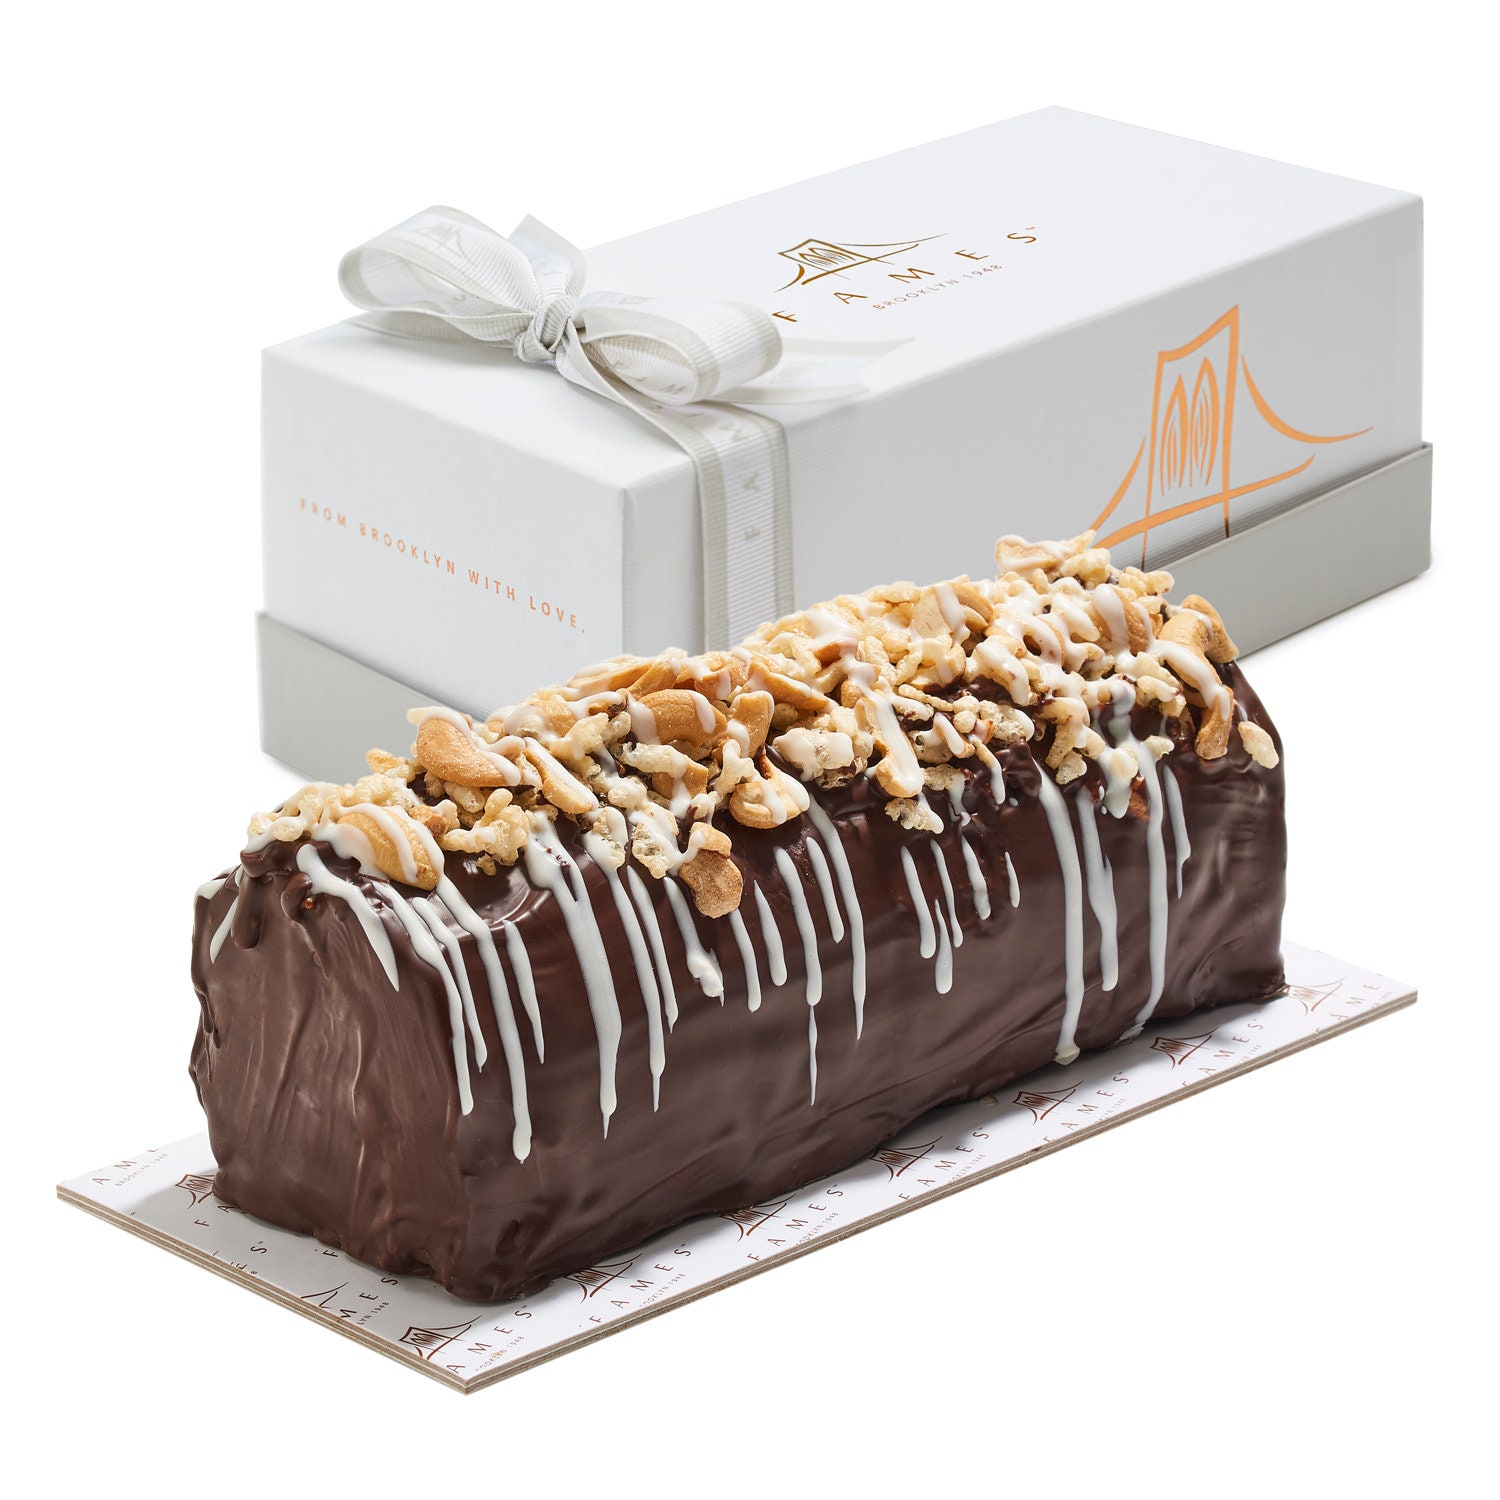 Fames Chocolate Butter Blend Log, Luxury Gift For That Special Someone